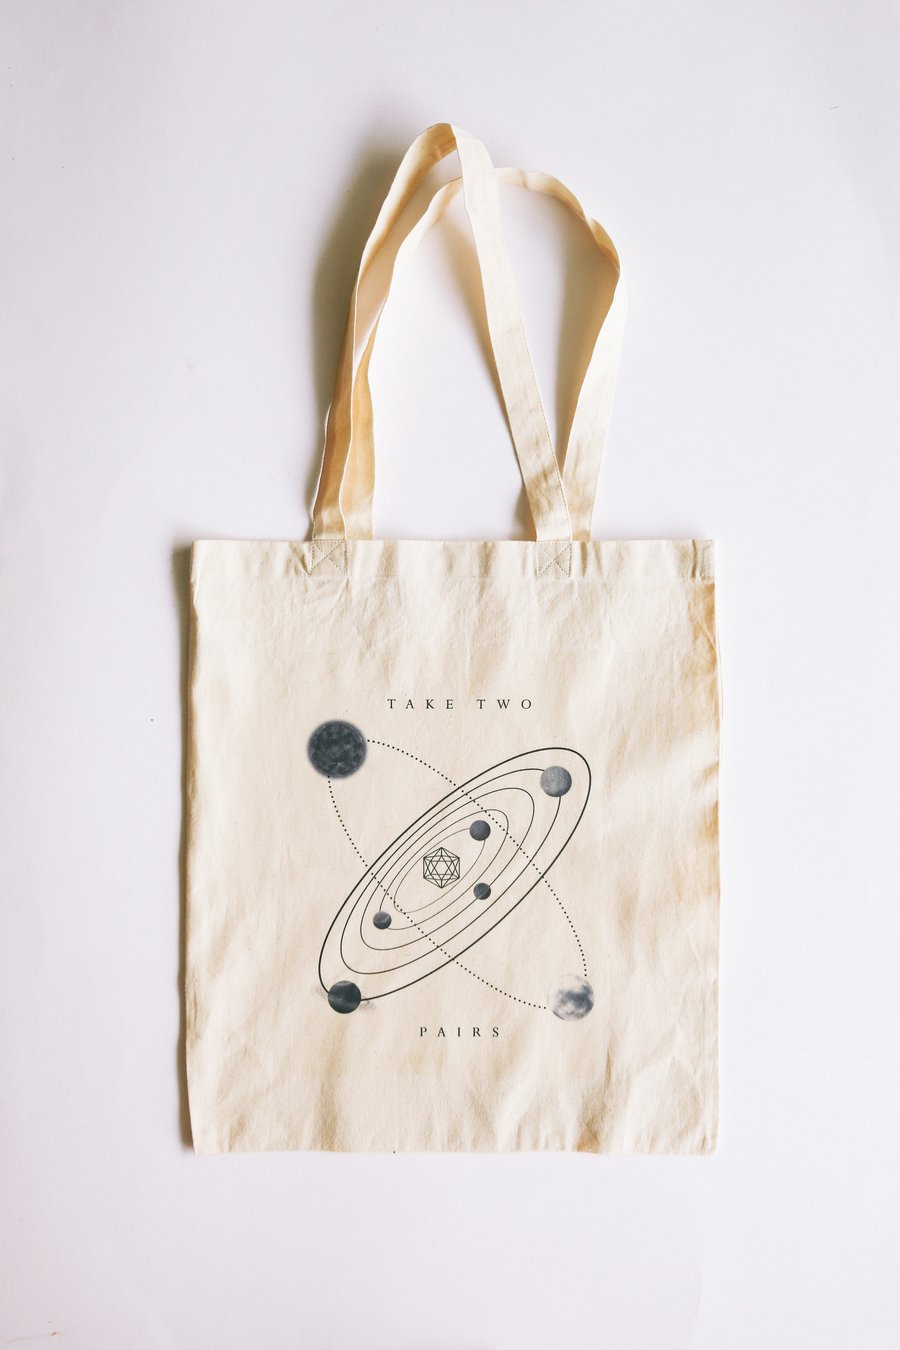 Image of "PAIRS" Limited Edition Tote Bag